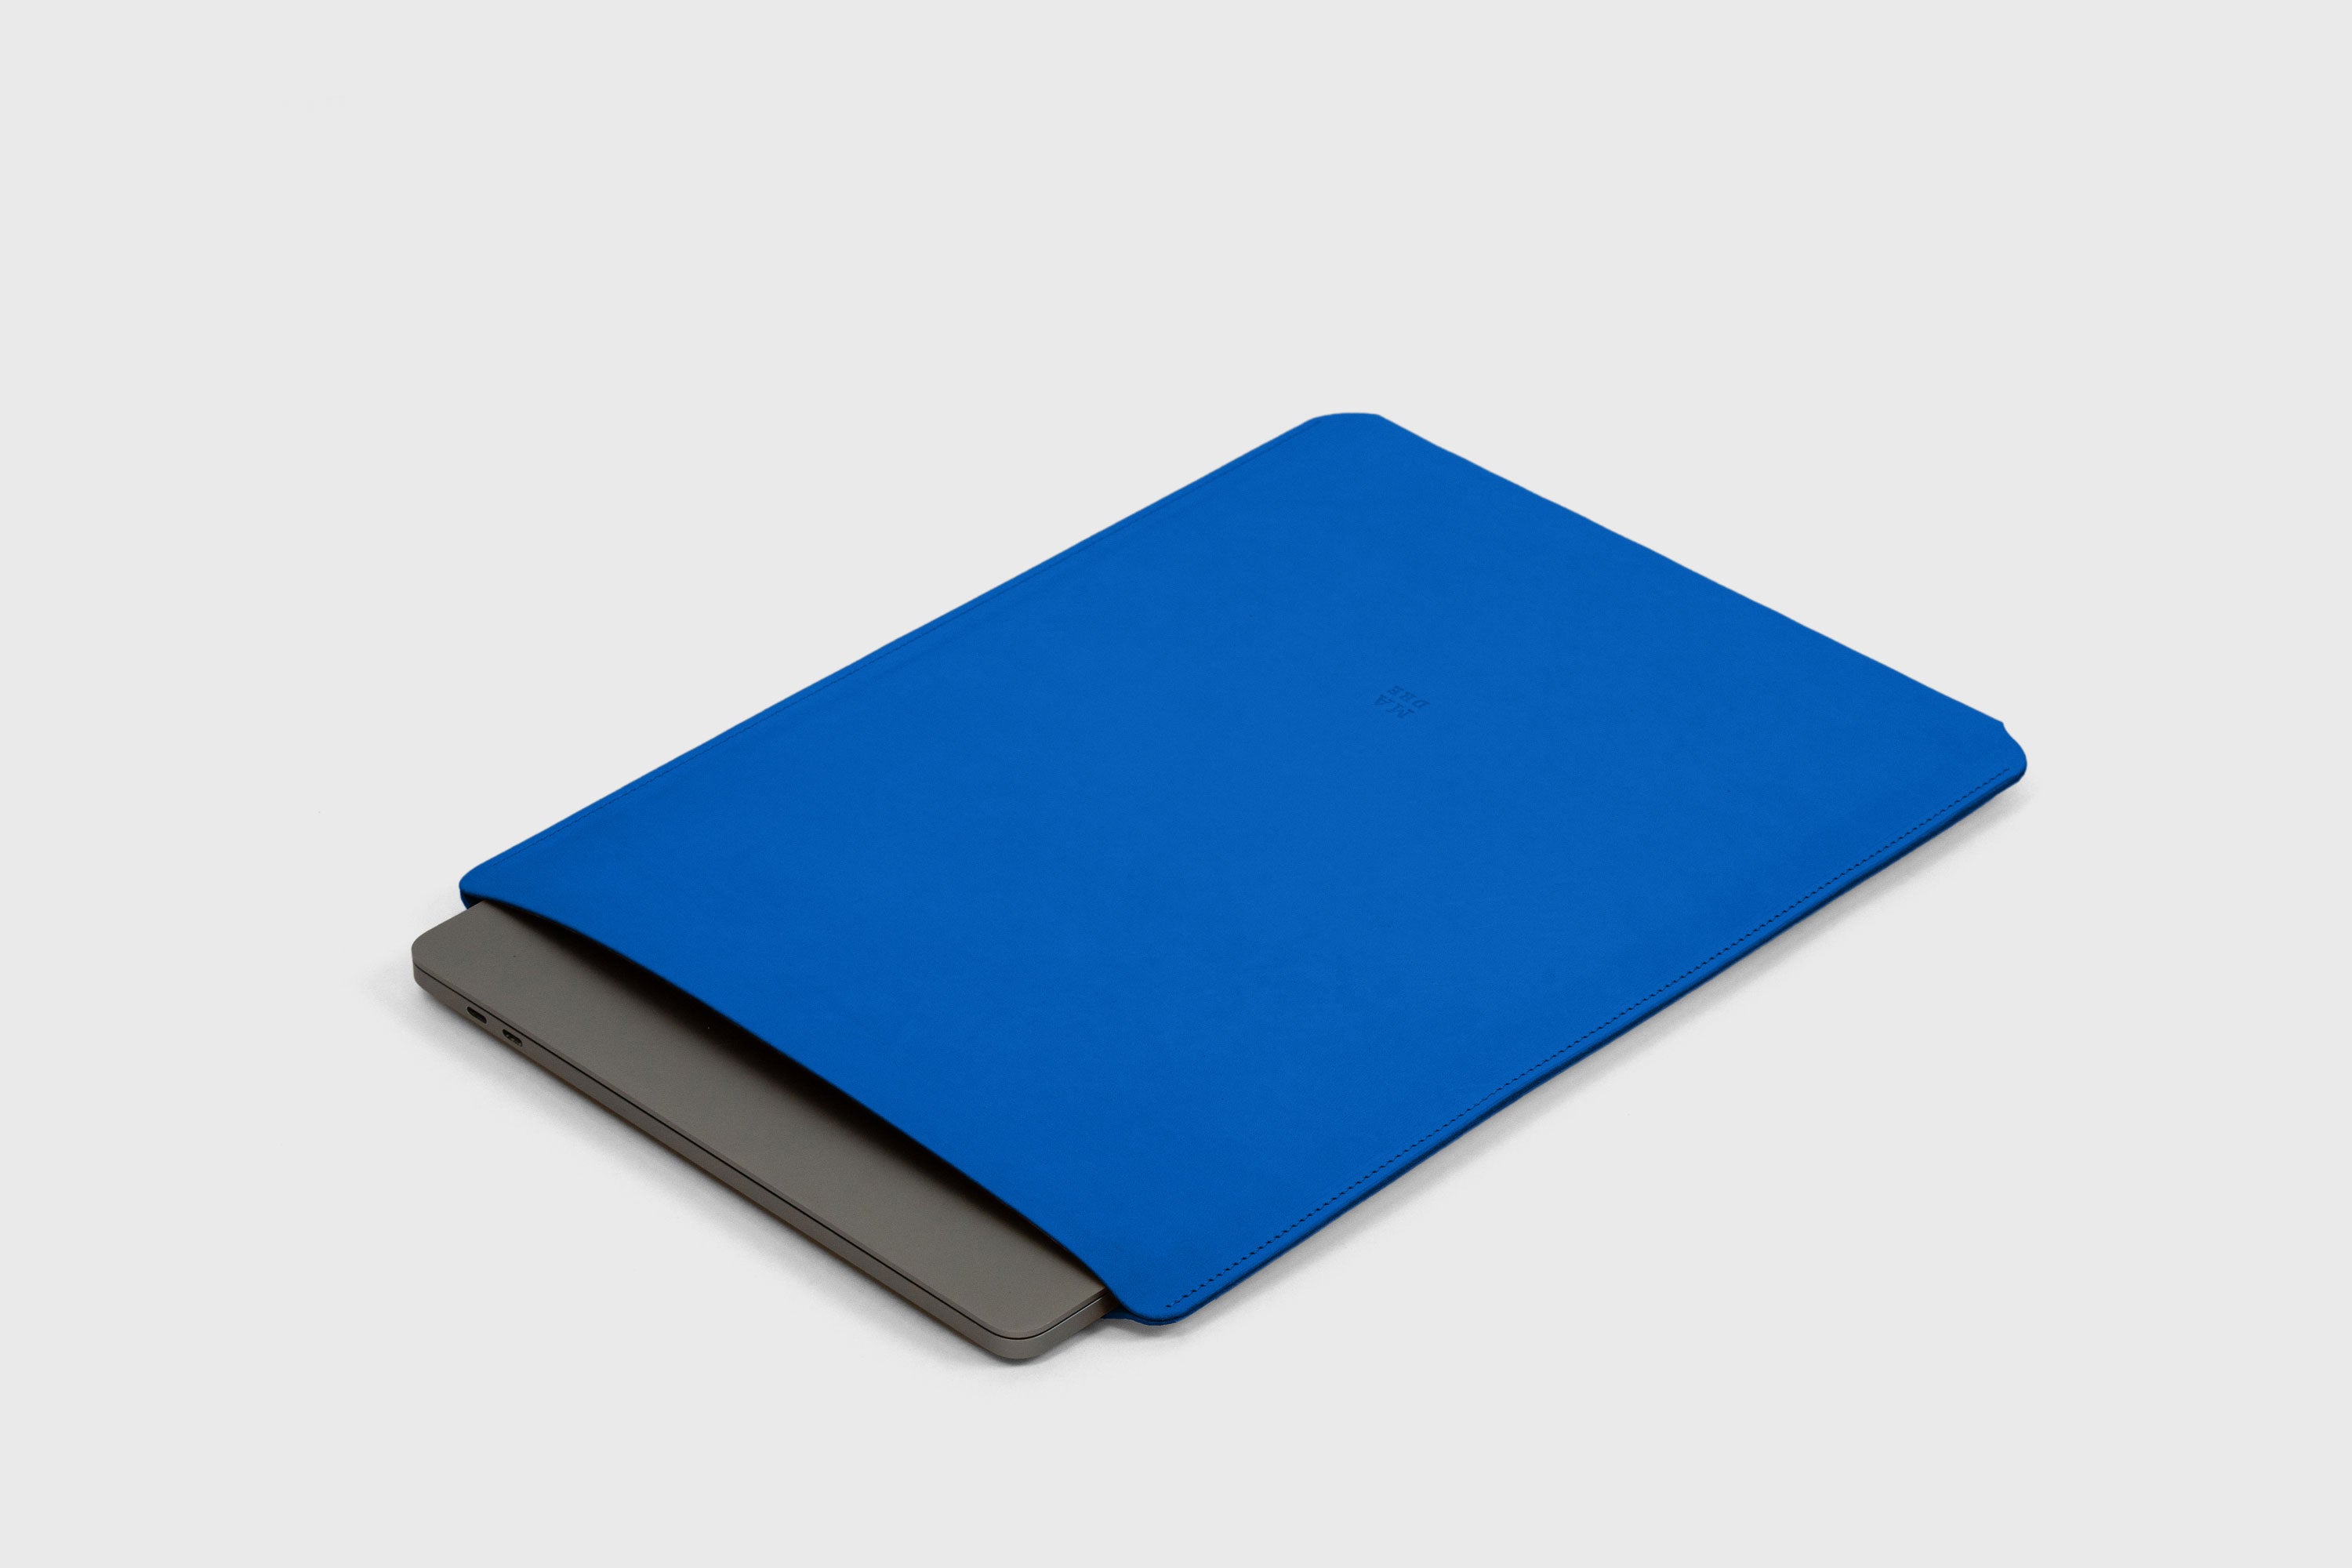 MacBook Pro Sleeve 16 Inch Leather Premium Royal Blue Vegetable Tanned Leather Minimalistic Design By Manuel Dreesmann Atelier Madre Barcelona Spain